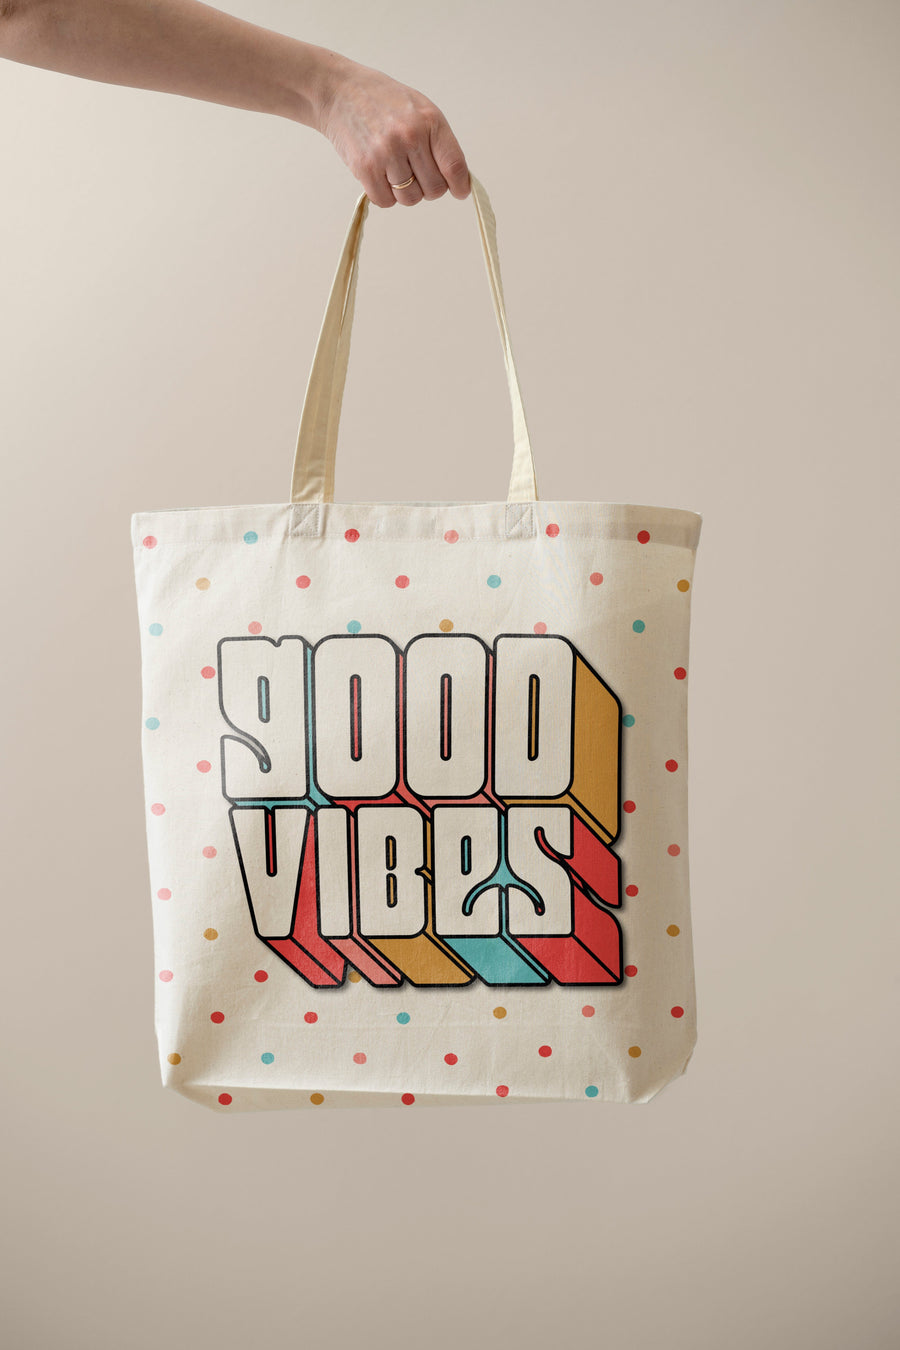 Good Vibes - Tote Bag Lunch Boxes & Totes CandyFlossstores 